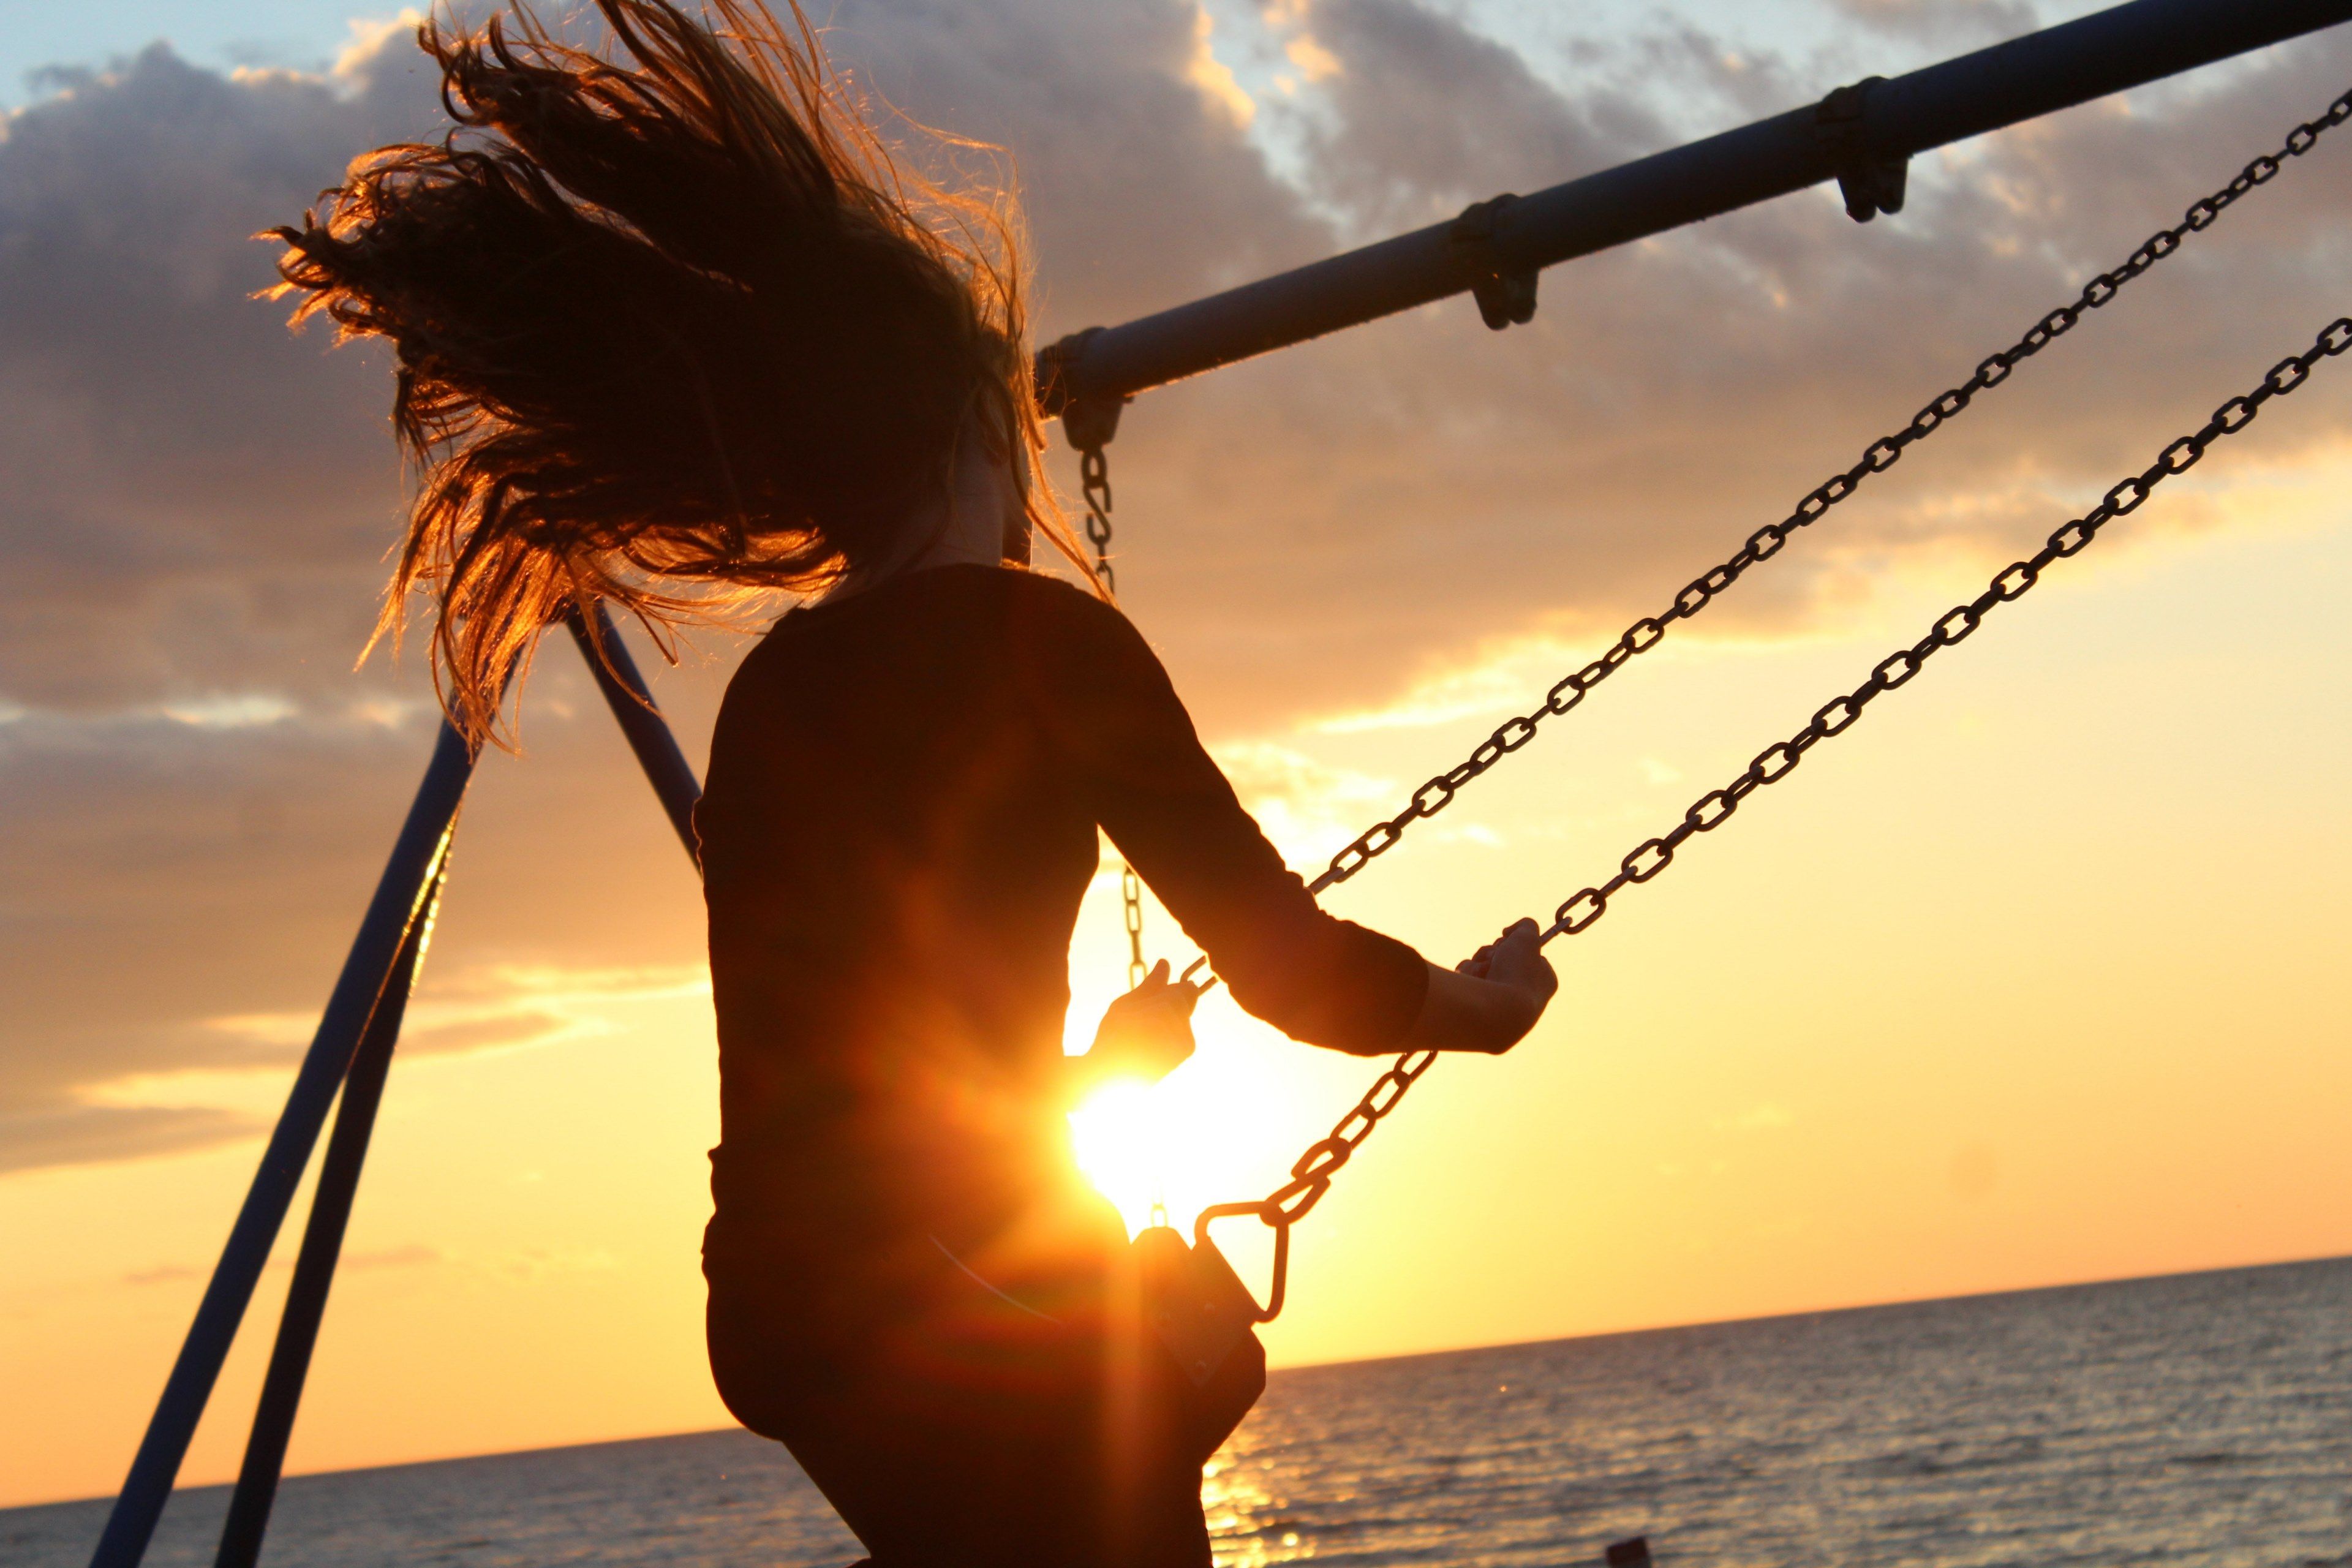 a woman with long hair swings high on a swing near the ocean at